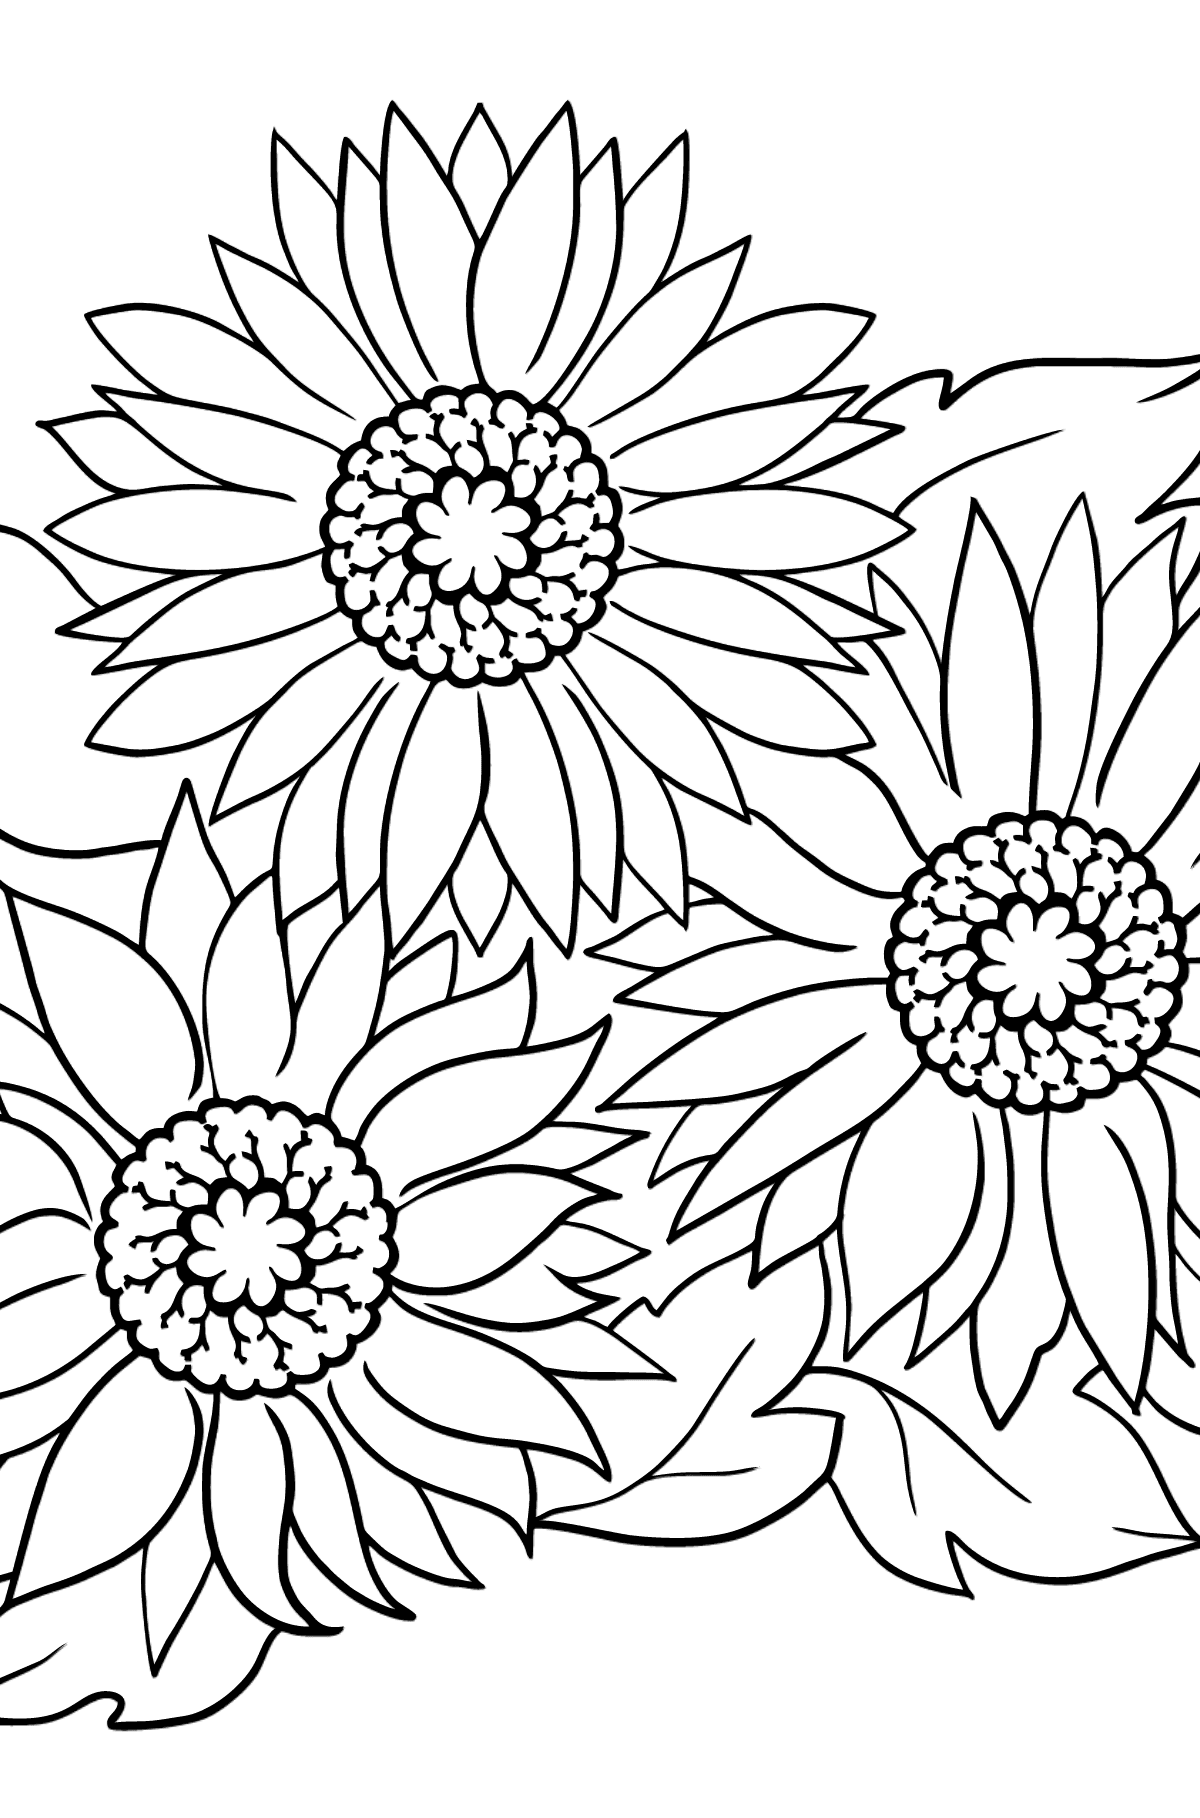 Coloring Page Yellow Gerbera - Coloring Pages for Kids